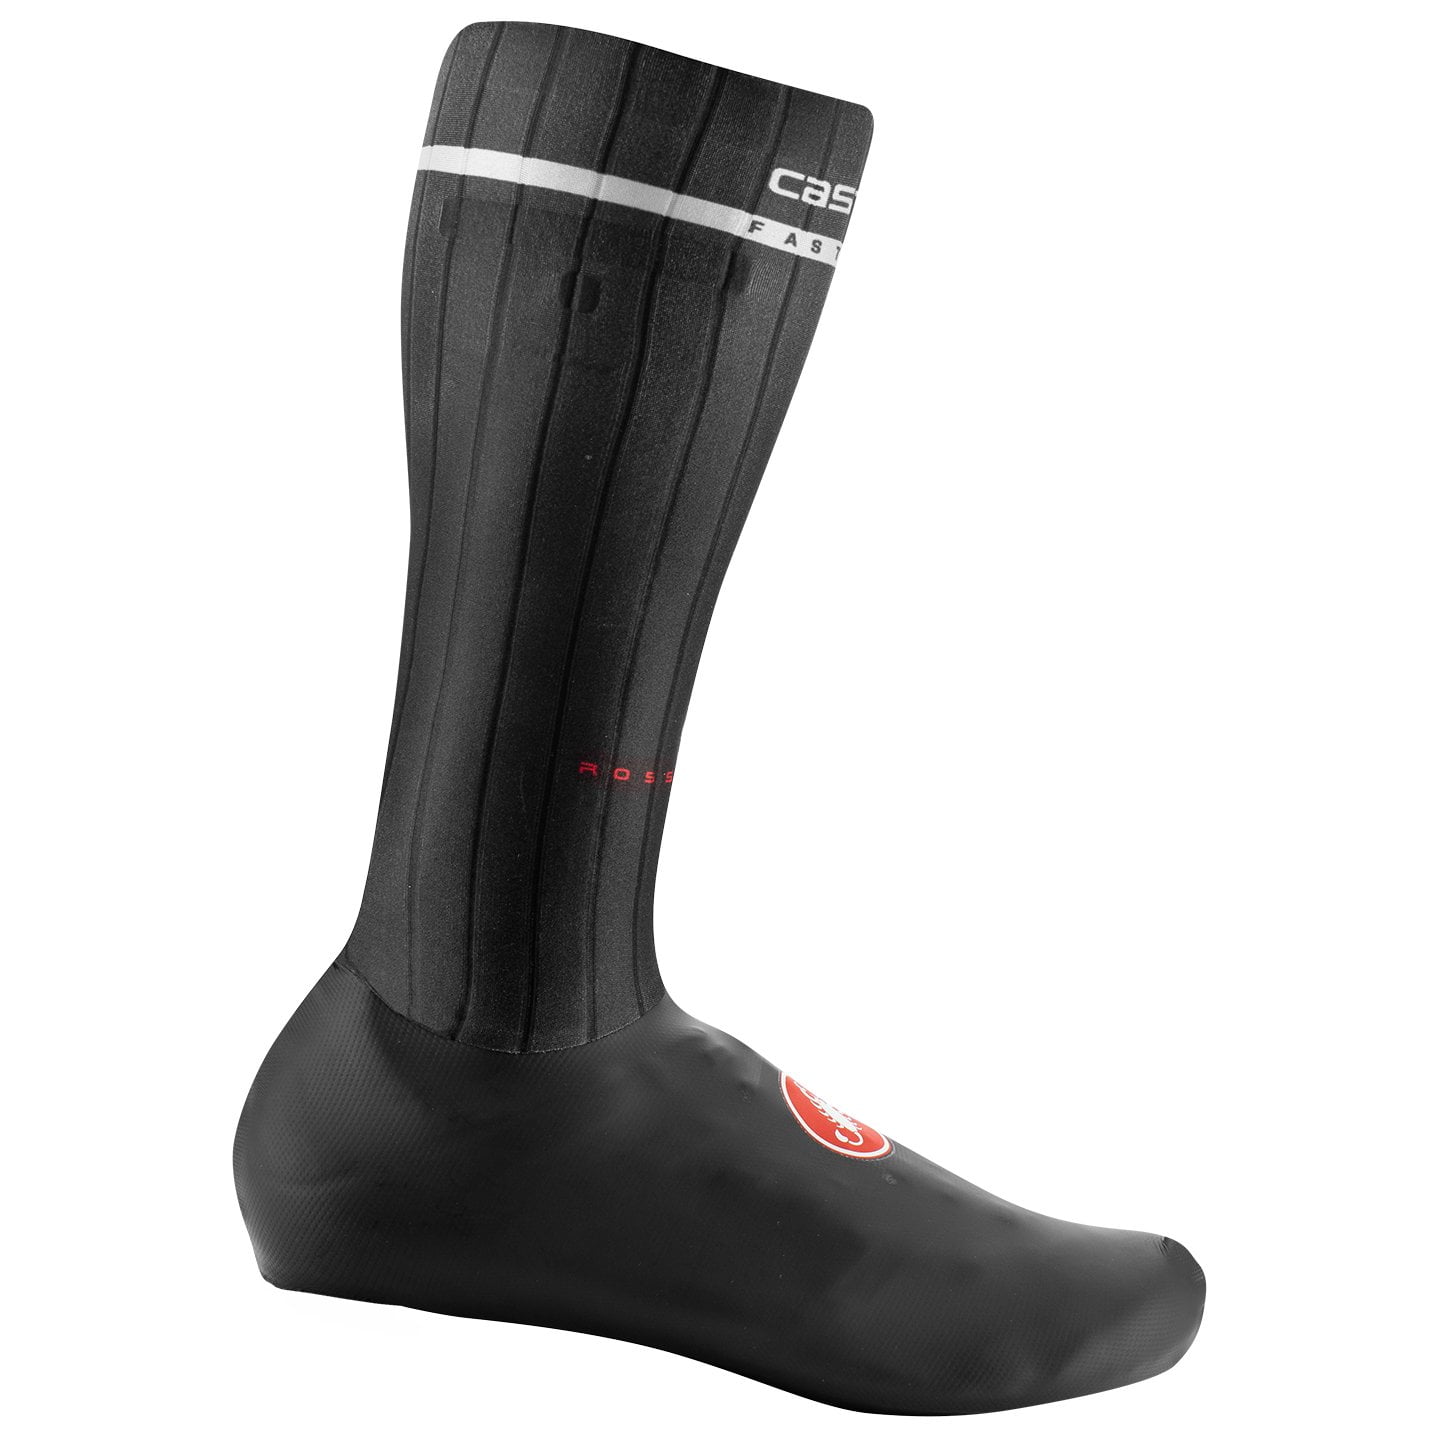 CASTELLI Fast Feet TT 2 Time Trial Shoe Covers Time Trial Shoe Covers, Unisex (women / men), size XL, Road bike shoe covers, Cycling clothing